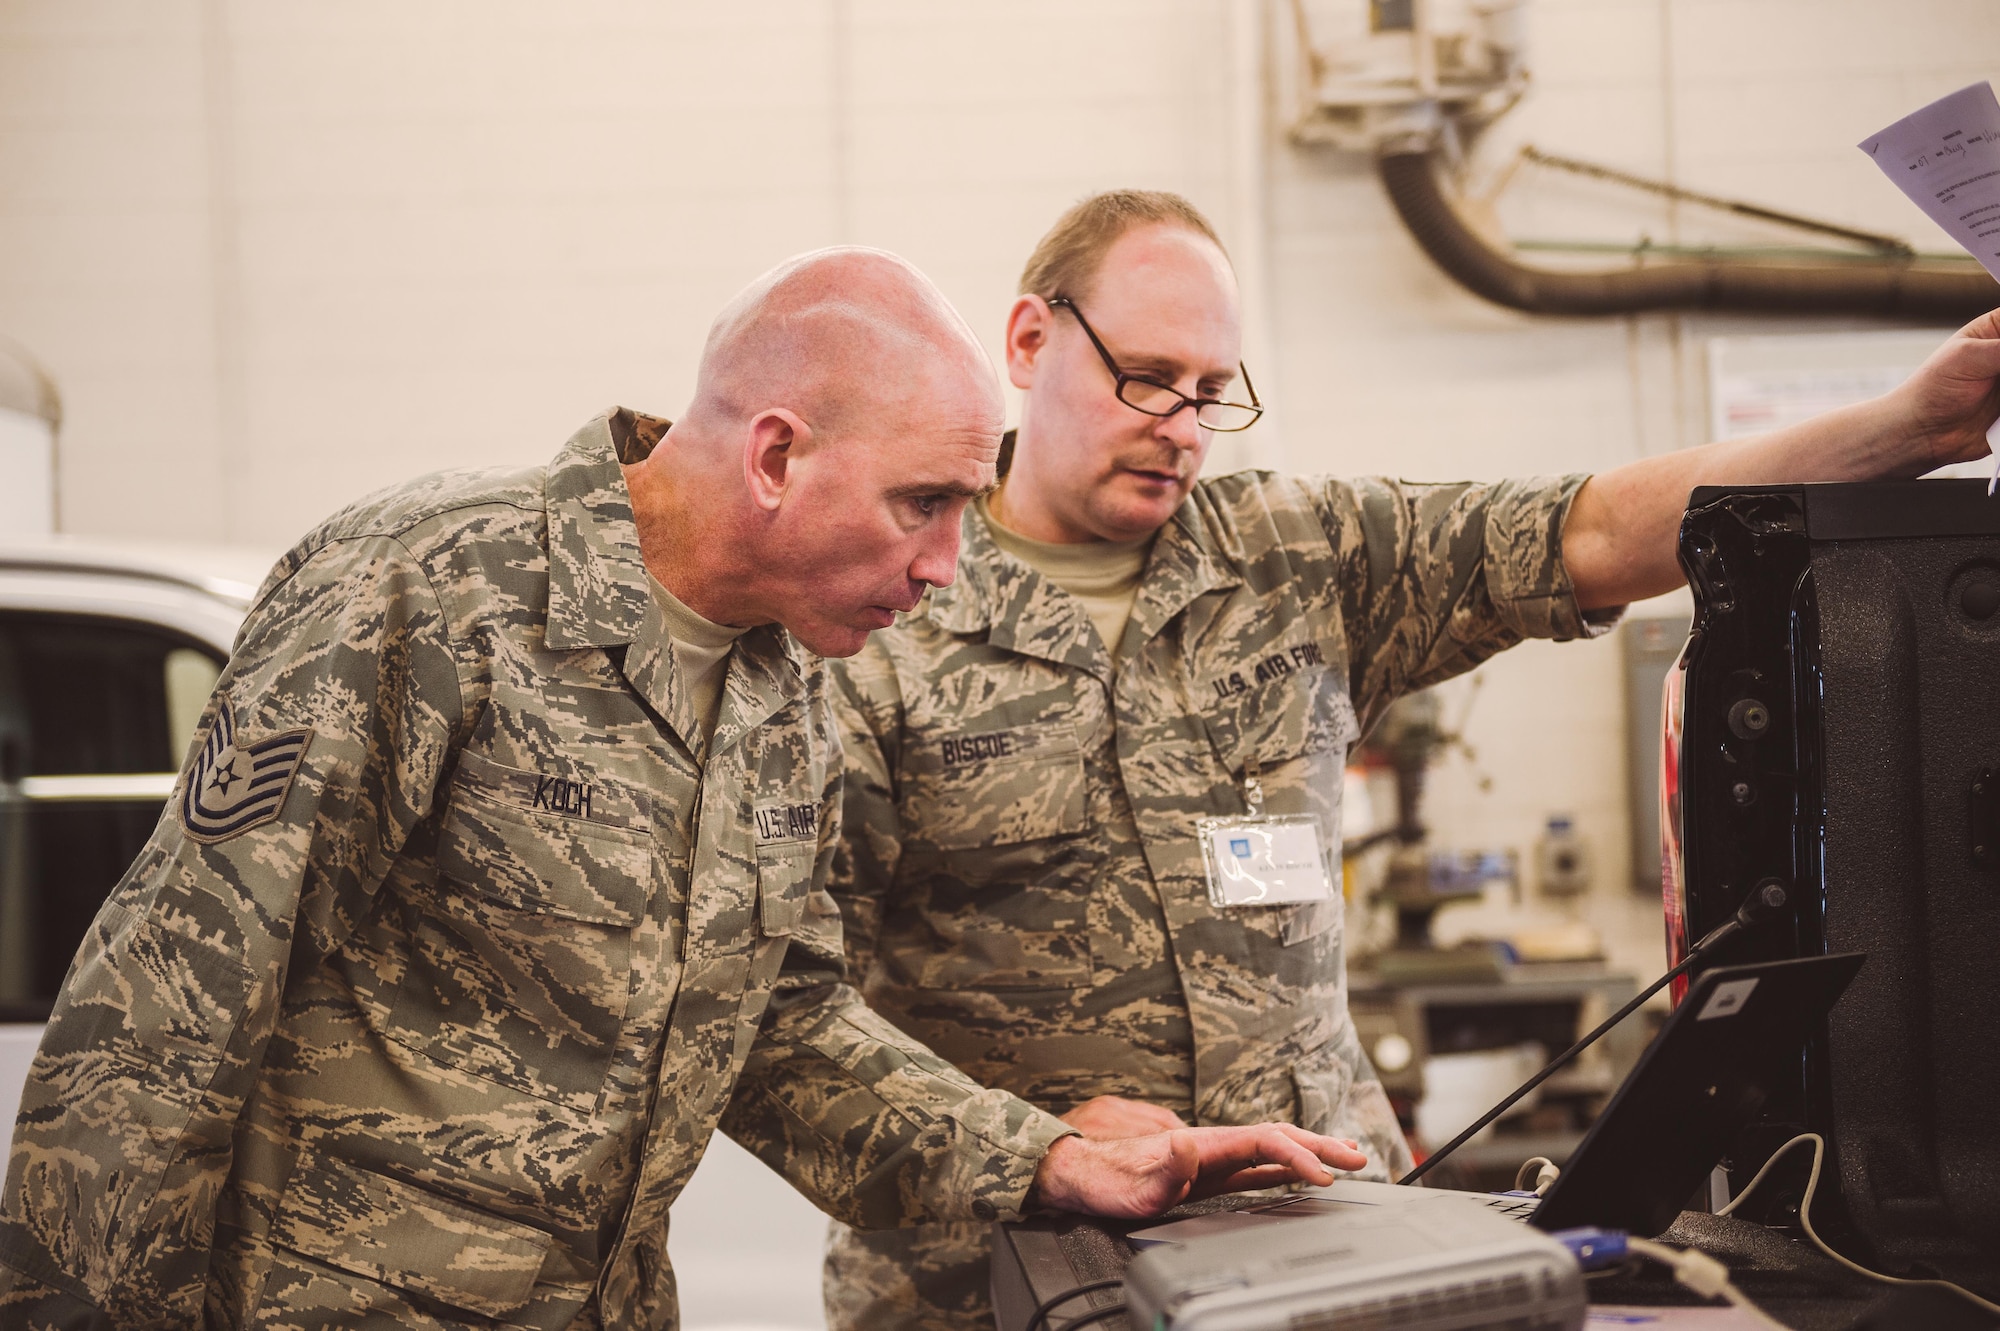 Airmen utilize the latest resources that General Motors and AC Delco regional instructors demonstrated in order to solve training scenarios that will improve their ability to diagnose and repair vehicles at their home units, Niagara Falls Air Reserve Station, N.Y., Feb. 22, 2017. The training was tailored to specifically meet the needs of the Airmen so they could gain new skills on situations they may run into at their home units. (U.S. Air National Guard photo by Staff Sgt. Ryan Campbell)